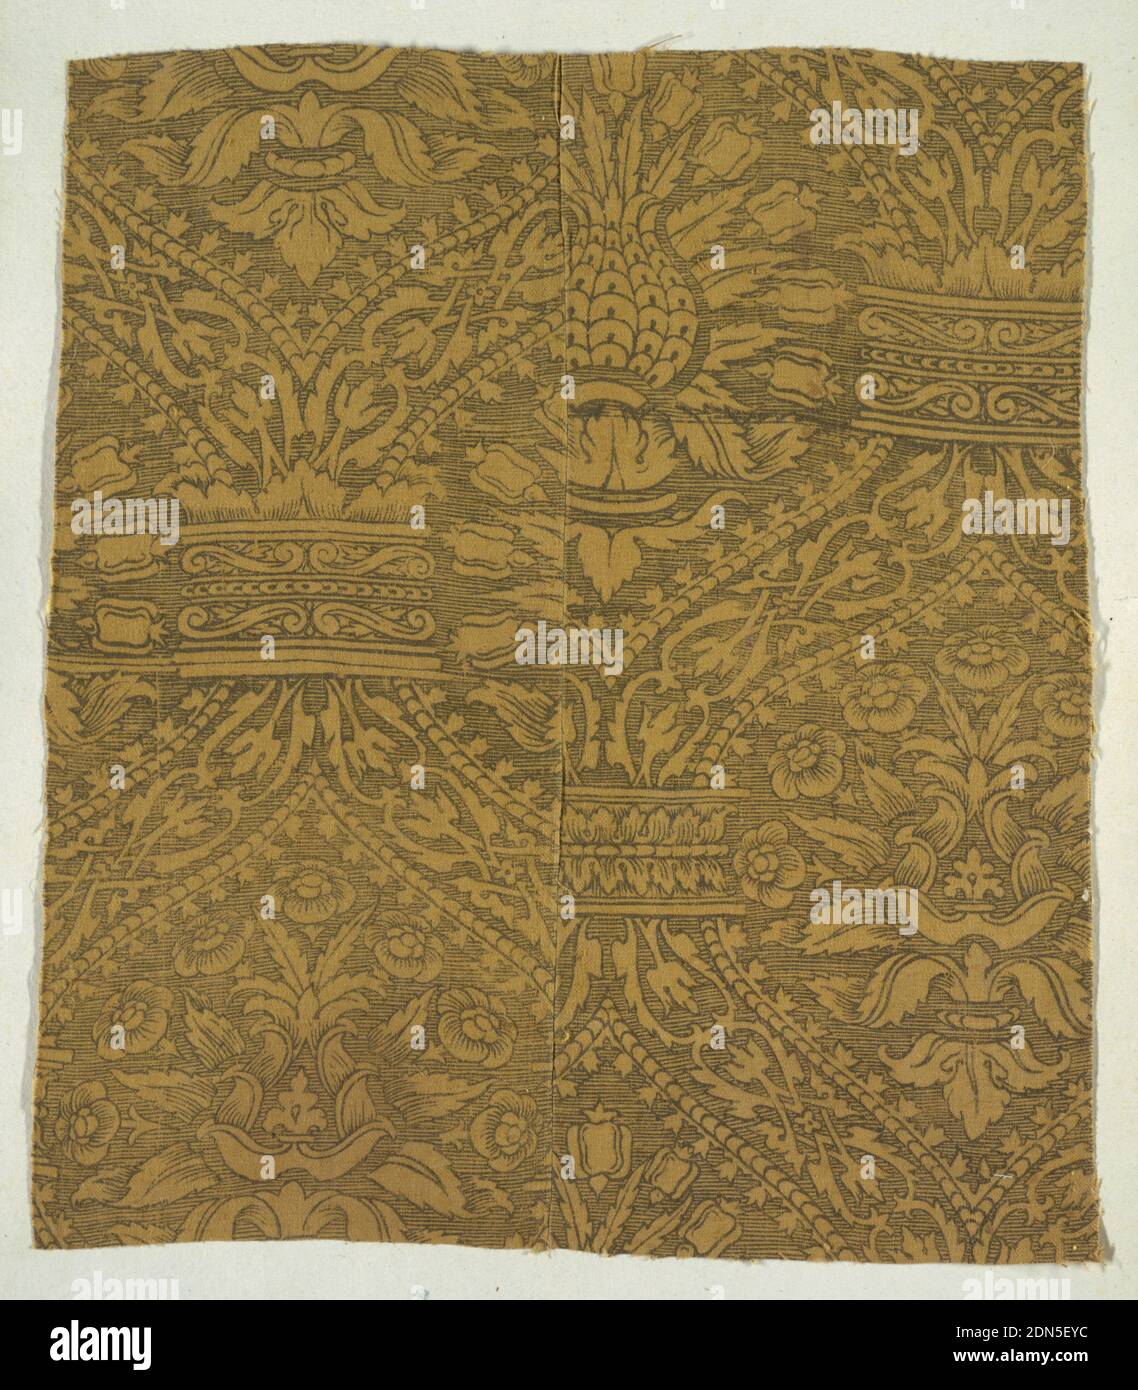 Fragment, Medium: linen warp, cotton weft Technique: block printed on 1&3 (S) twill, Pineapple or artichoke pattern in a heavy ogival framing device, printed in black on a yellow-gold ground., Spain, late 15th–early 16th century, printed, dyed & painted textiles, Fragment Stock Photo